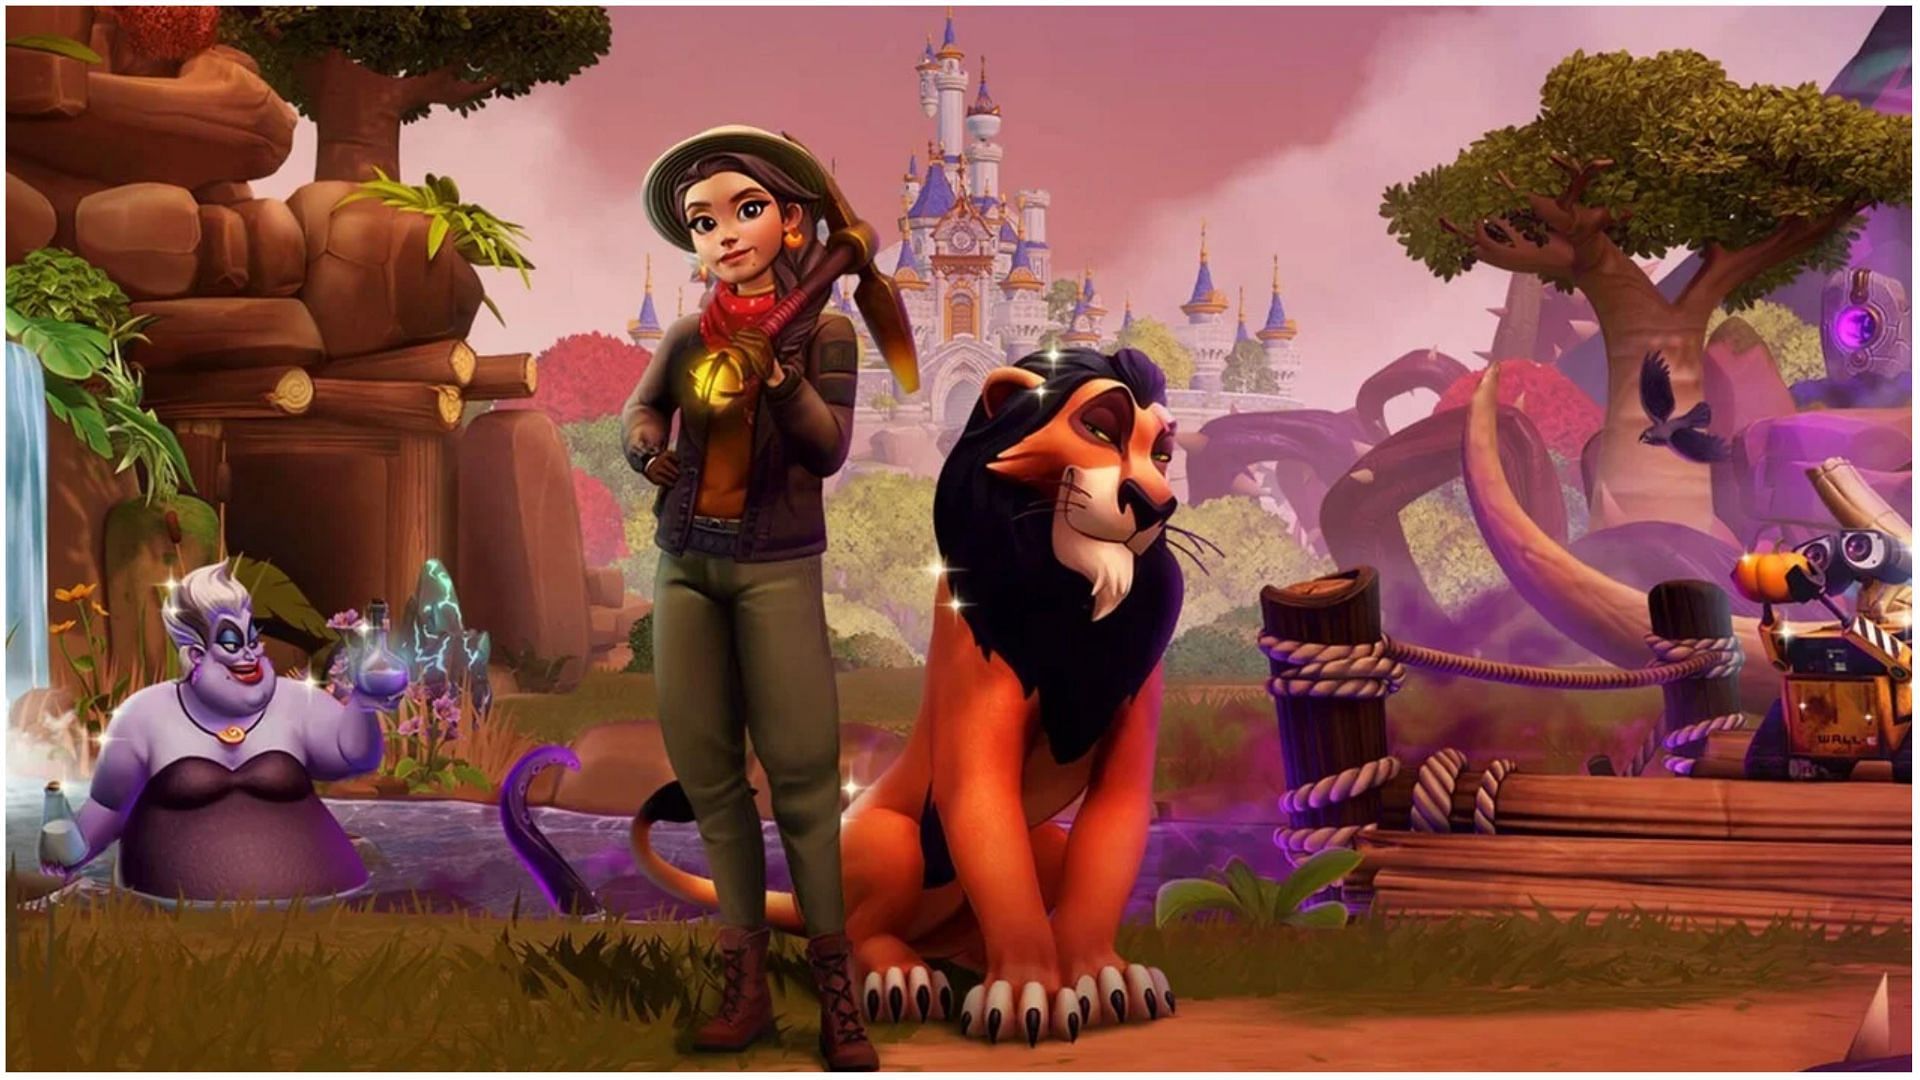 A new update adds Scar to Disney Dreamlight Valley (Image via Gameloft)